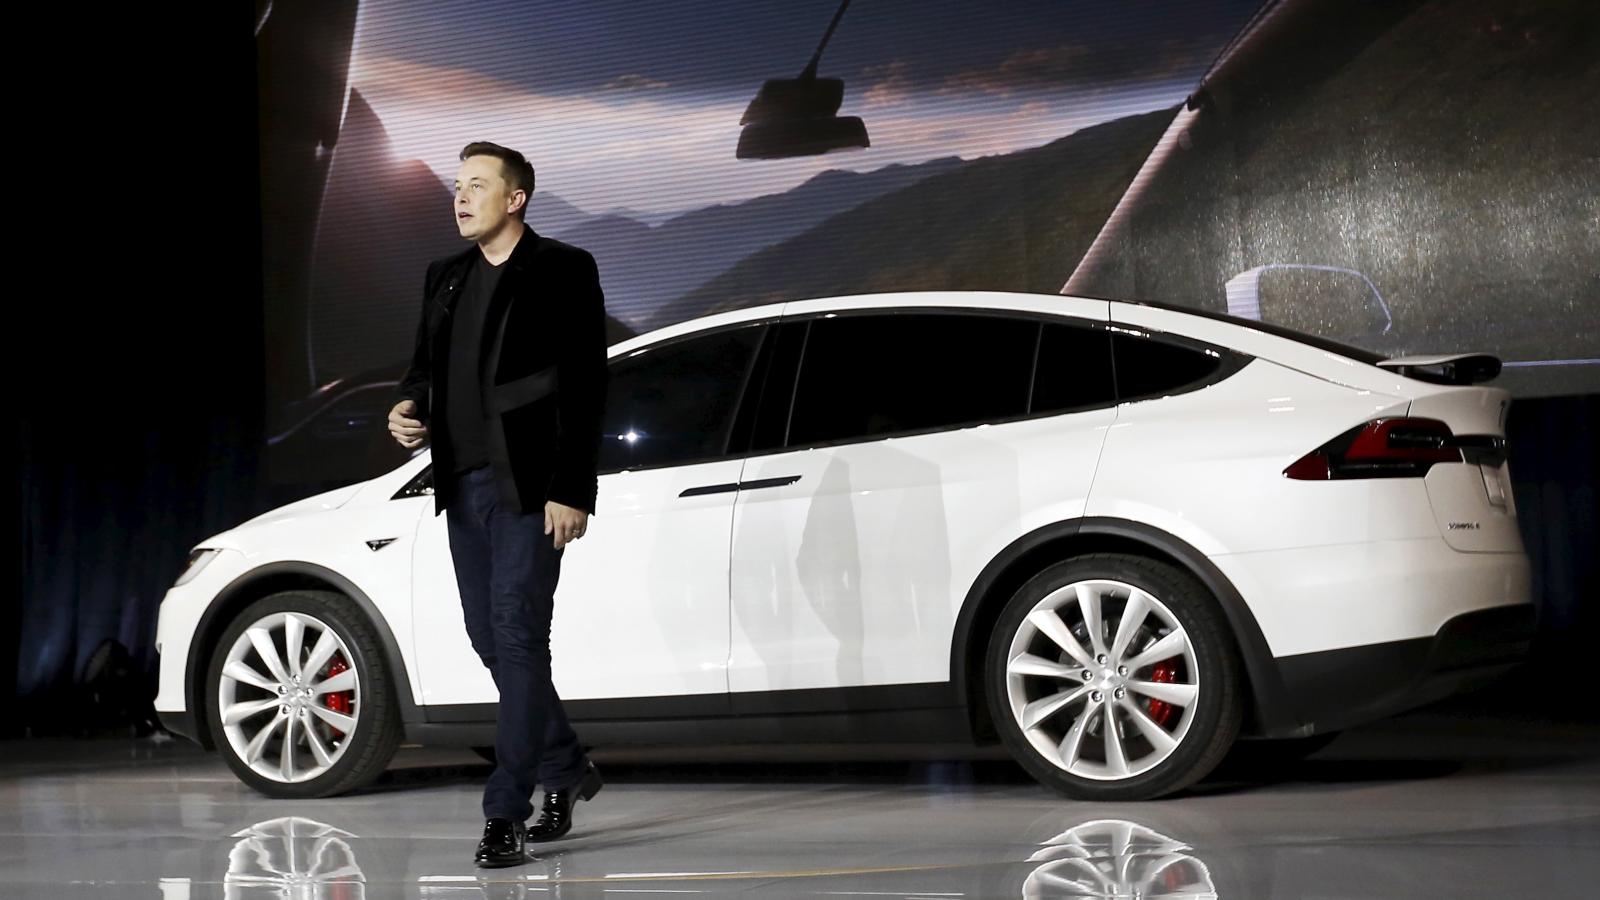 Tesla may release $25K electric car with no steering wheel